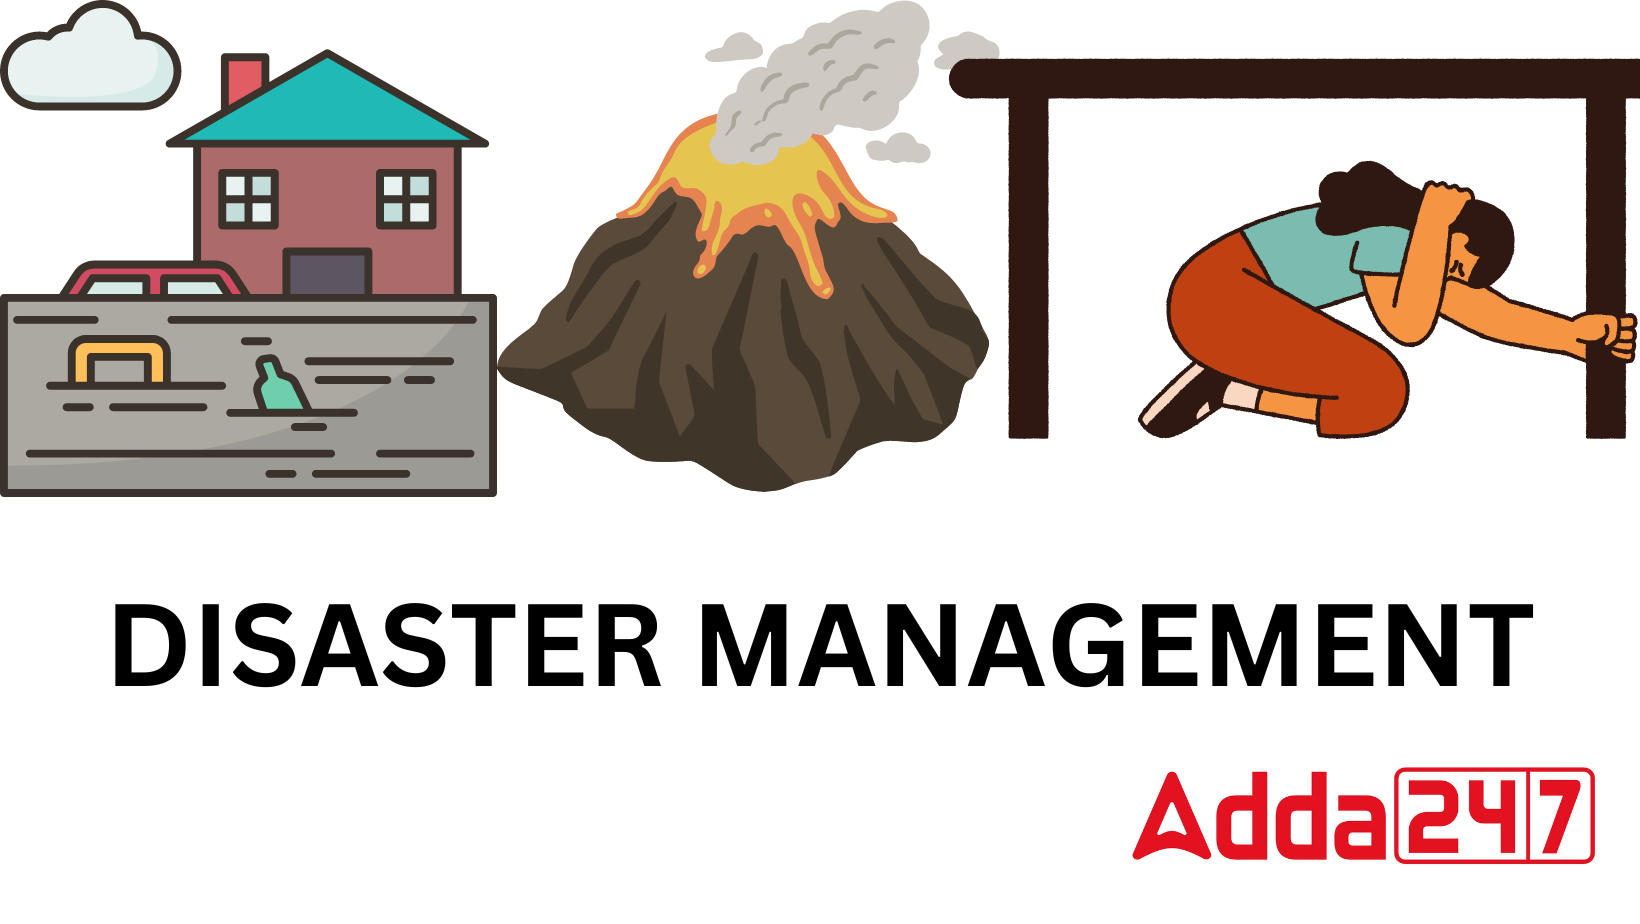 Disaster Management Project for Class 9 & 10 PDF Download_20.1